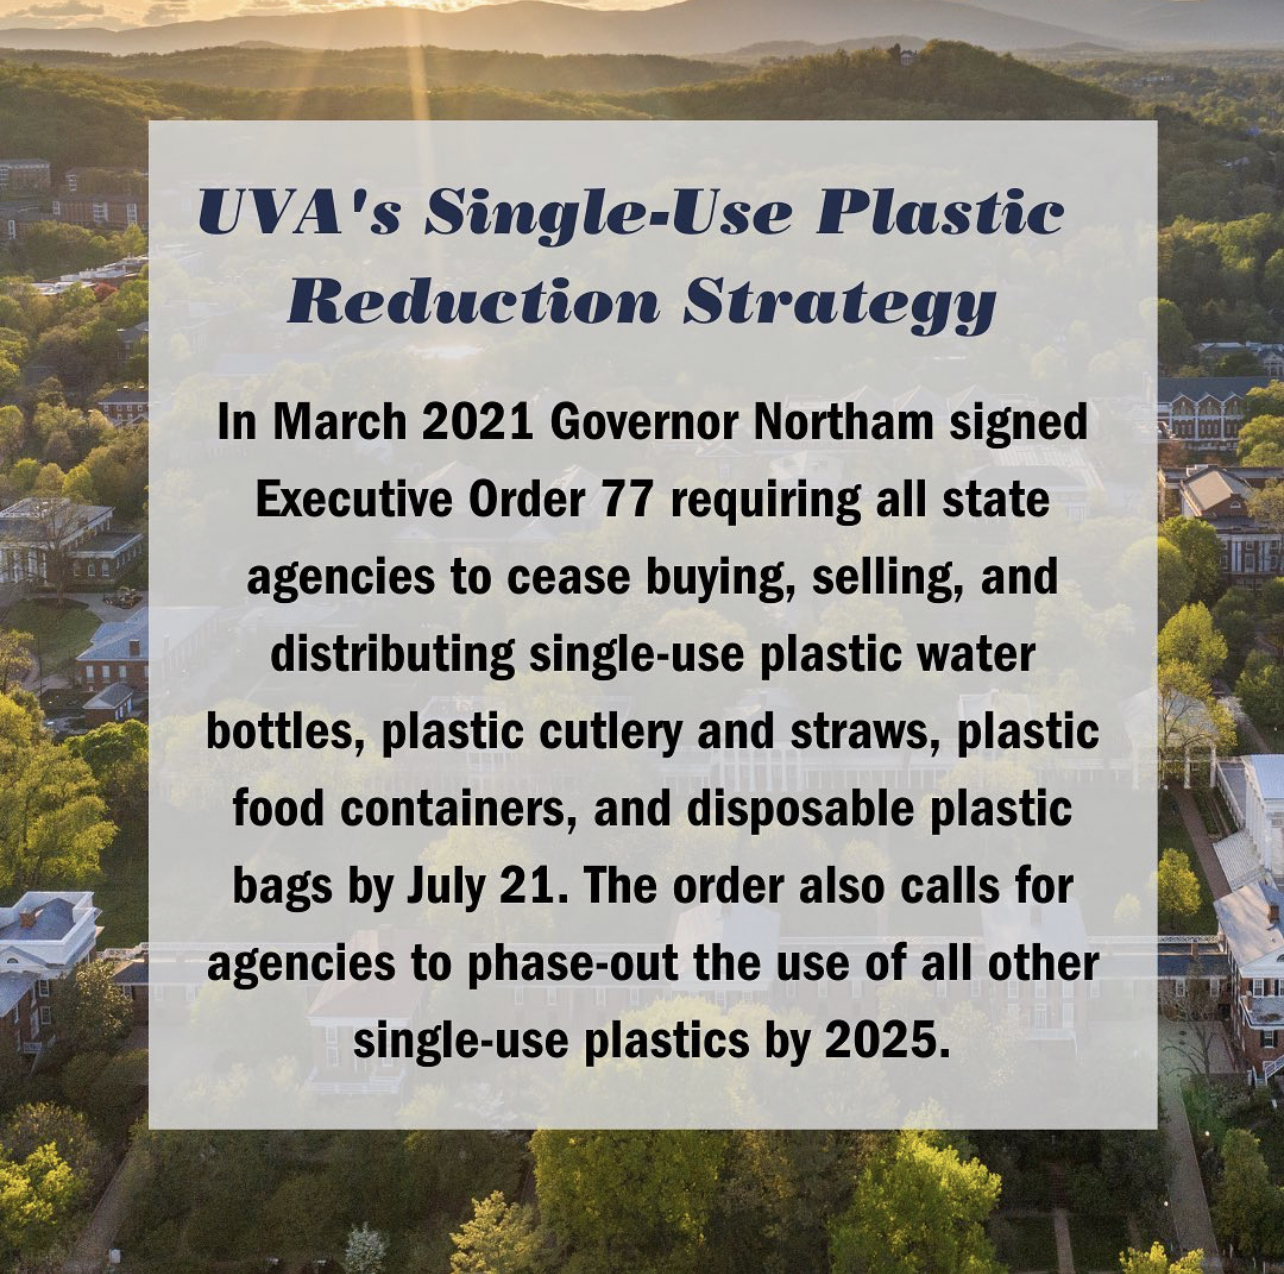 UVA's Single-Use Plastic Reduction Strategy: In March 2021, Governor Northan signed Executive Order 77 requiring all state agencies to cease buying, selling, and distirbuting single-use plastic water bottles, plastic cutlery and straws, plastic food containers, and disposable plastic bags by July 21. The order also calls for agencies to phase out the use of all other single-use plastics by 2025.